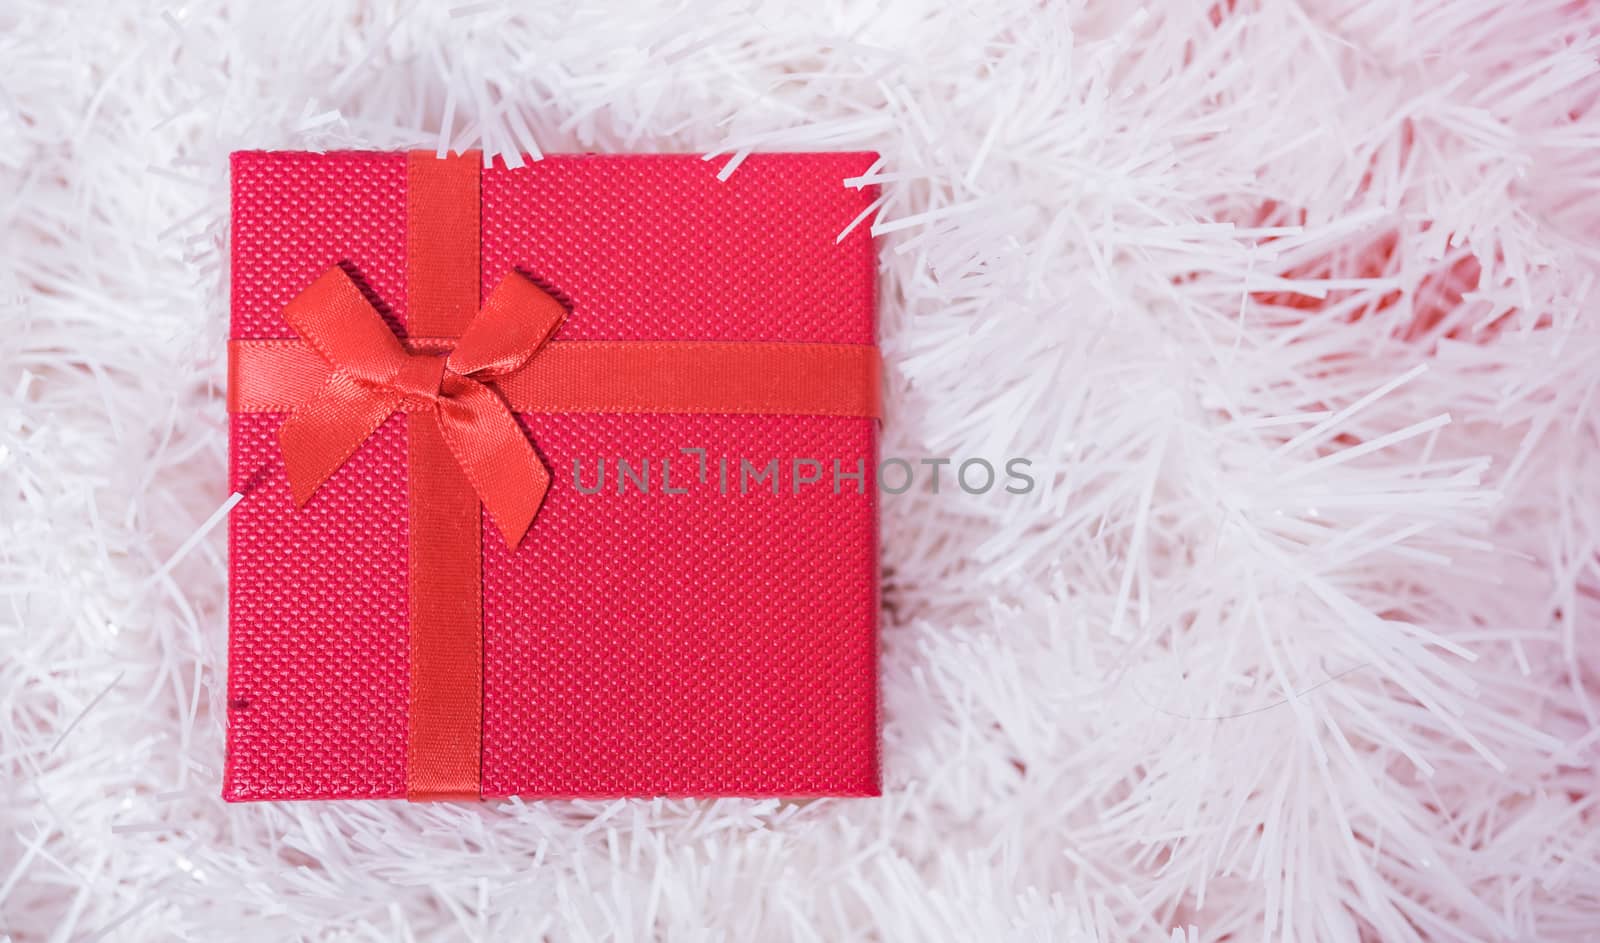 Top view close up Red gift box on white background